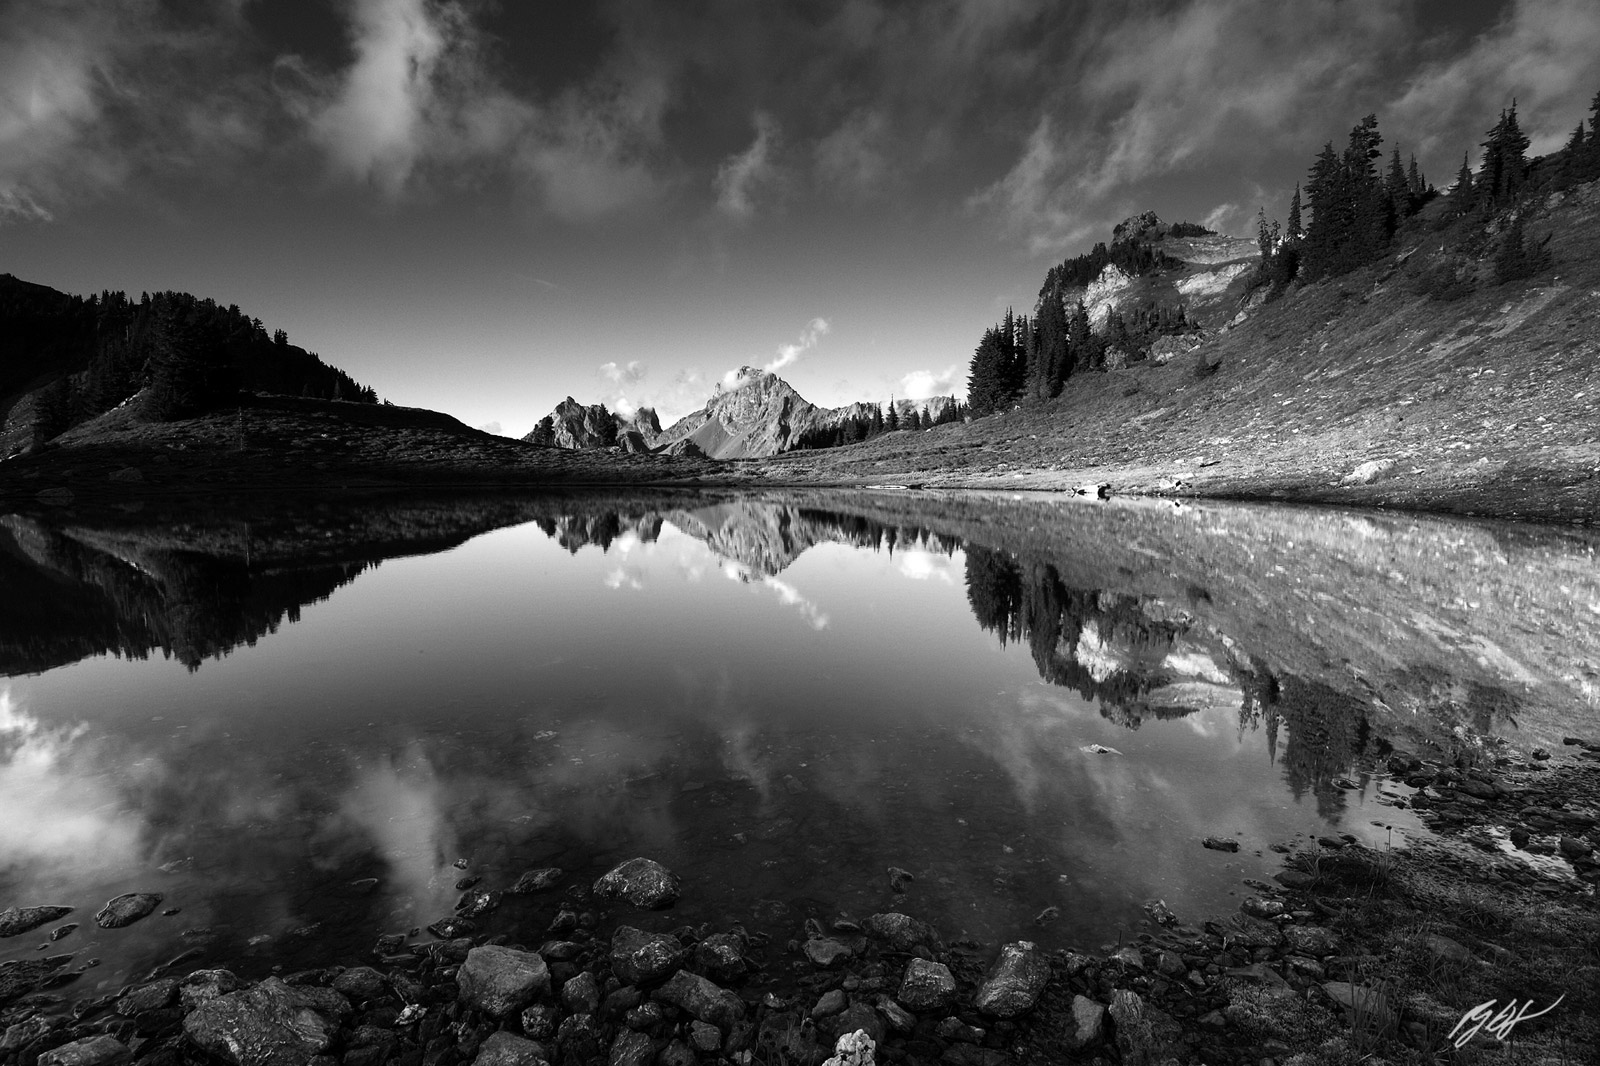 Mountain and Cloud Reflection in a Tarn from Yellow Aster Butte in the Mt Baker Wilderness in Washington